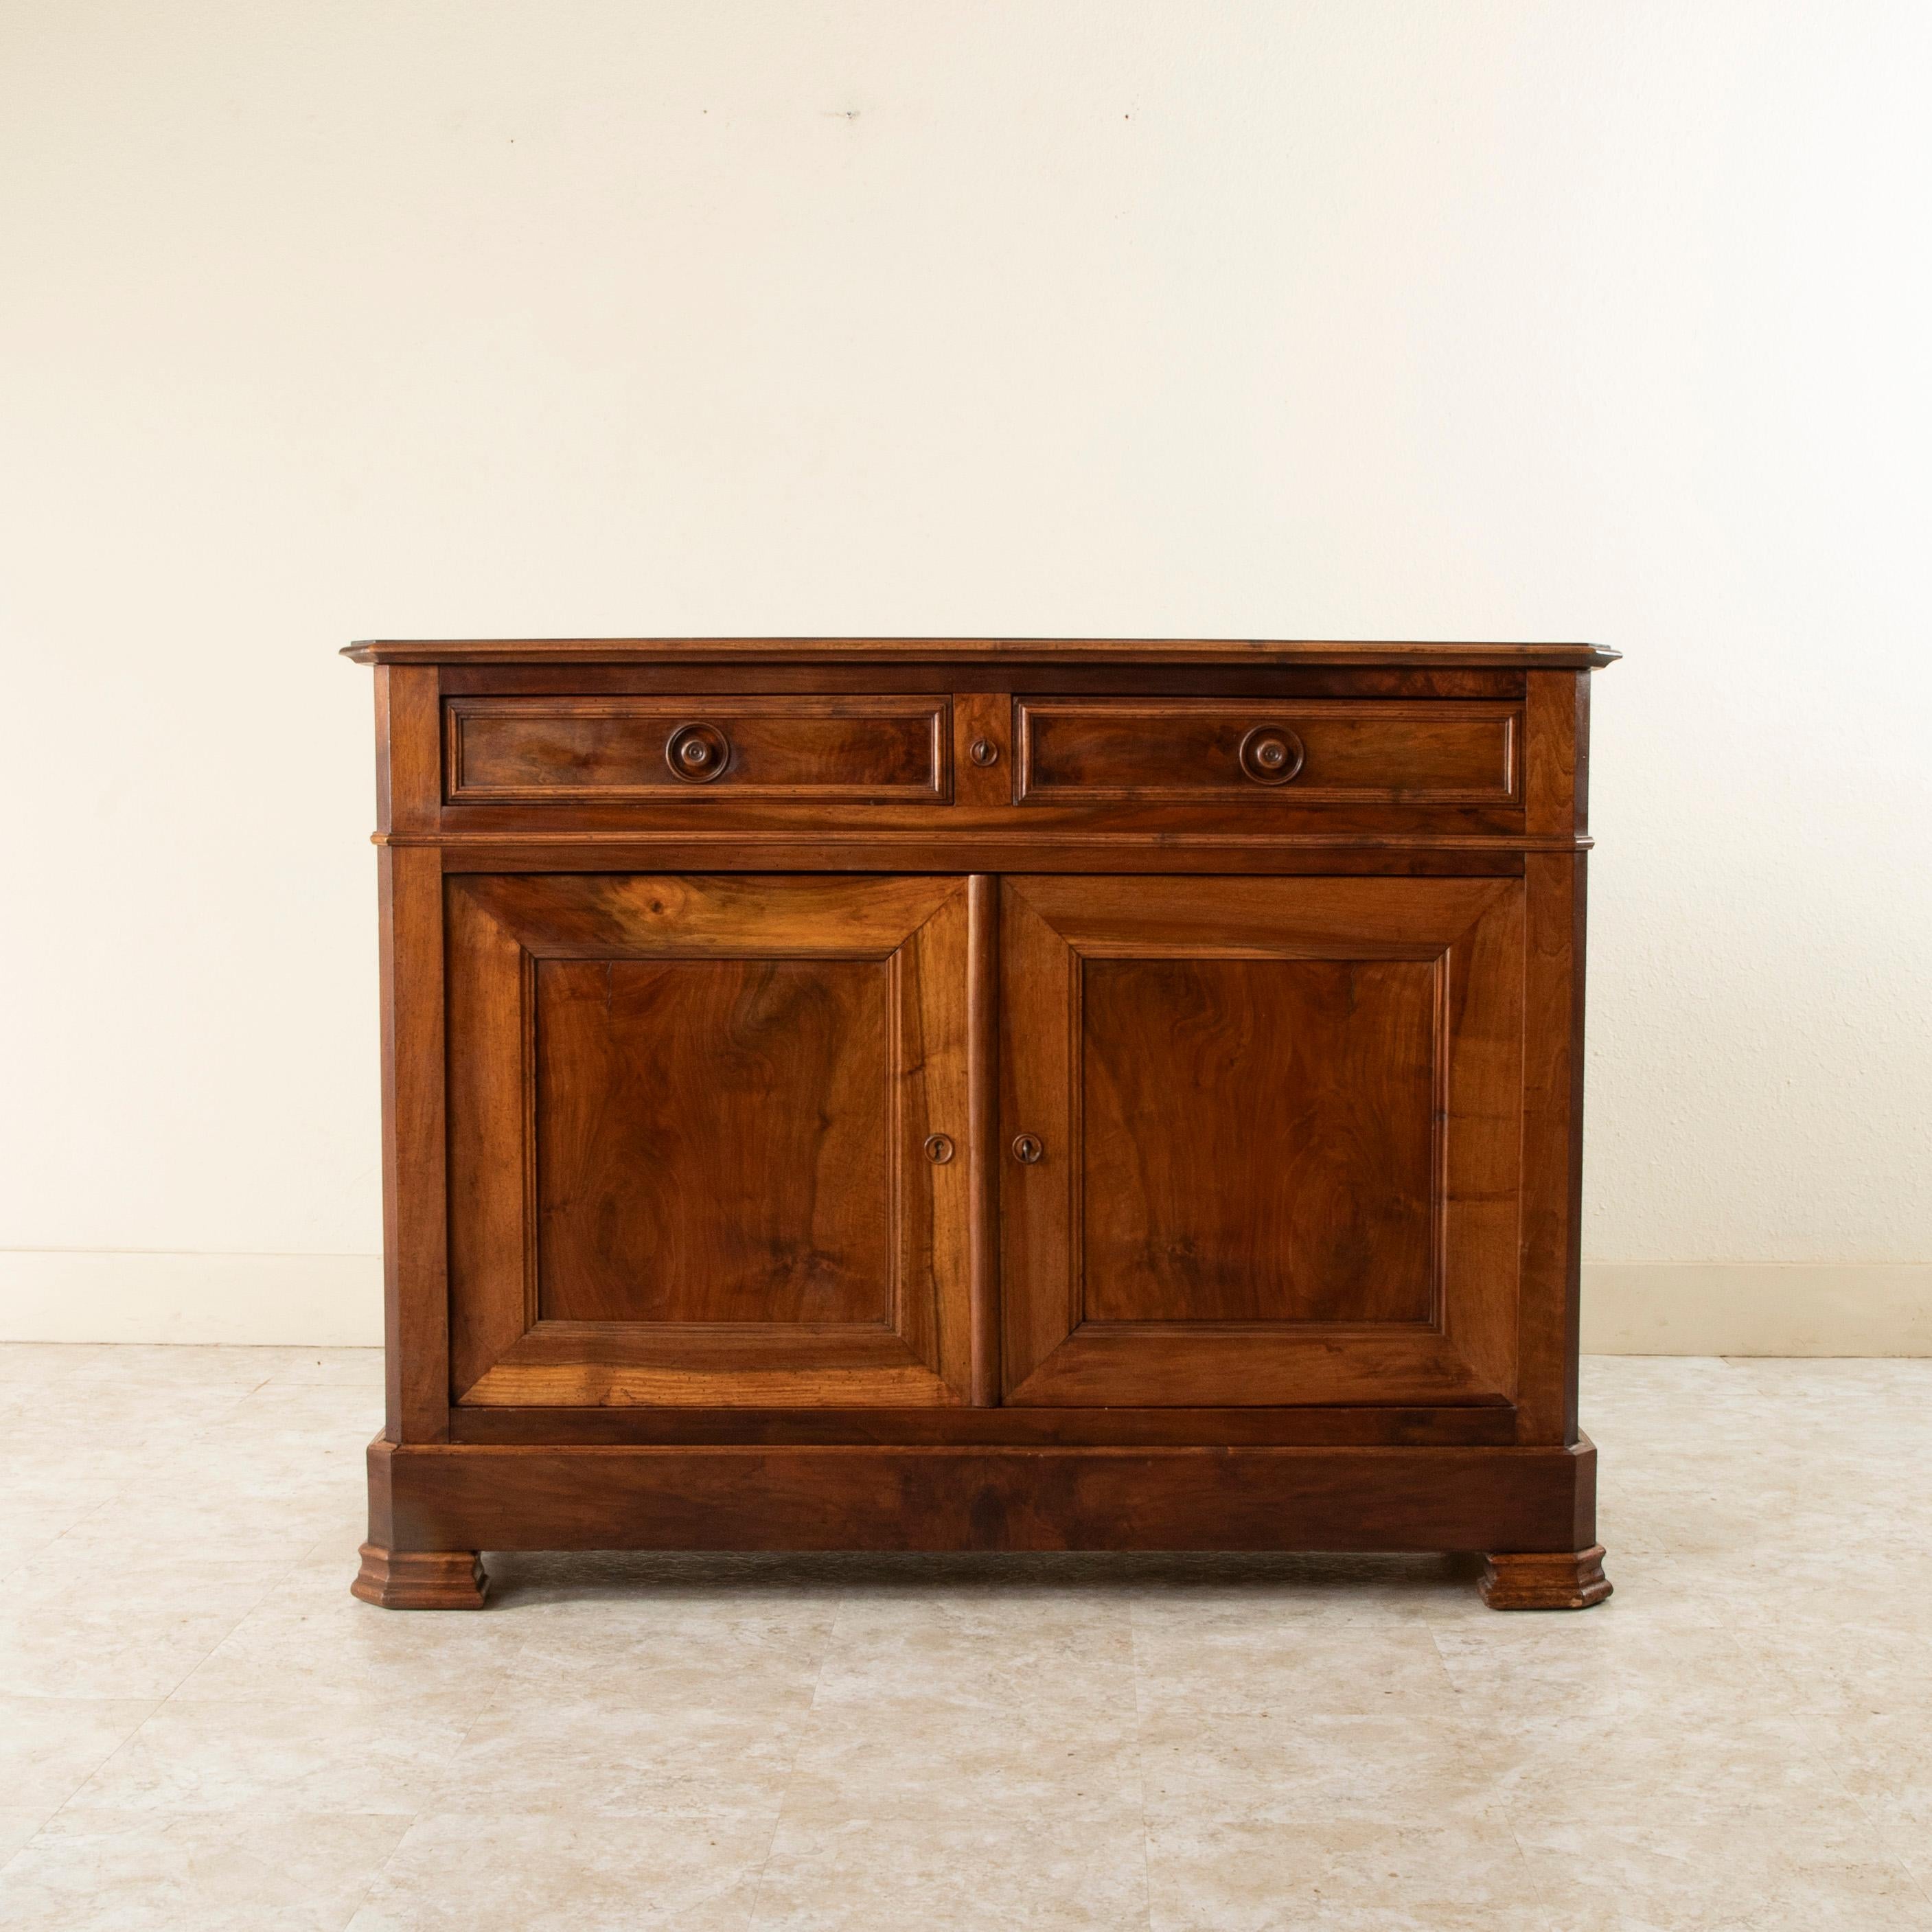 This small scale Louis Philippe period buffet from the nineteenth century is constructed of solid walnut. It features two drawers of dovetail construction that fit seamlessly into the apron and two lower doors that open wide to allow access to the